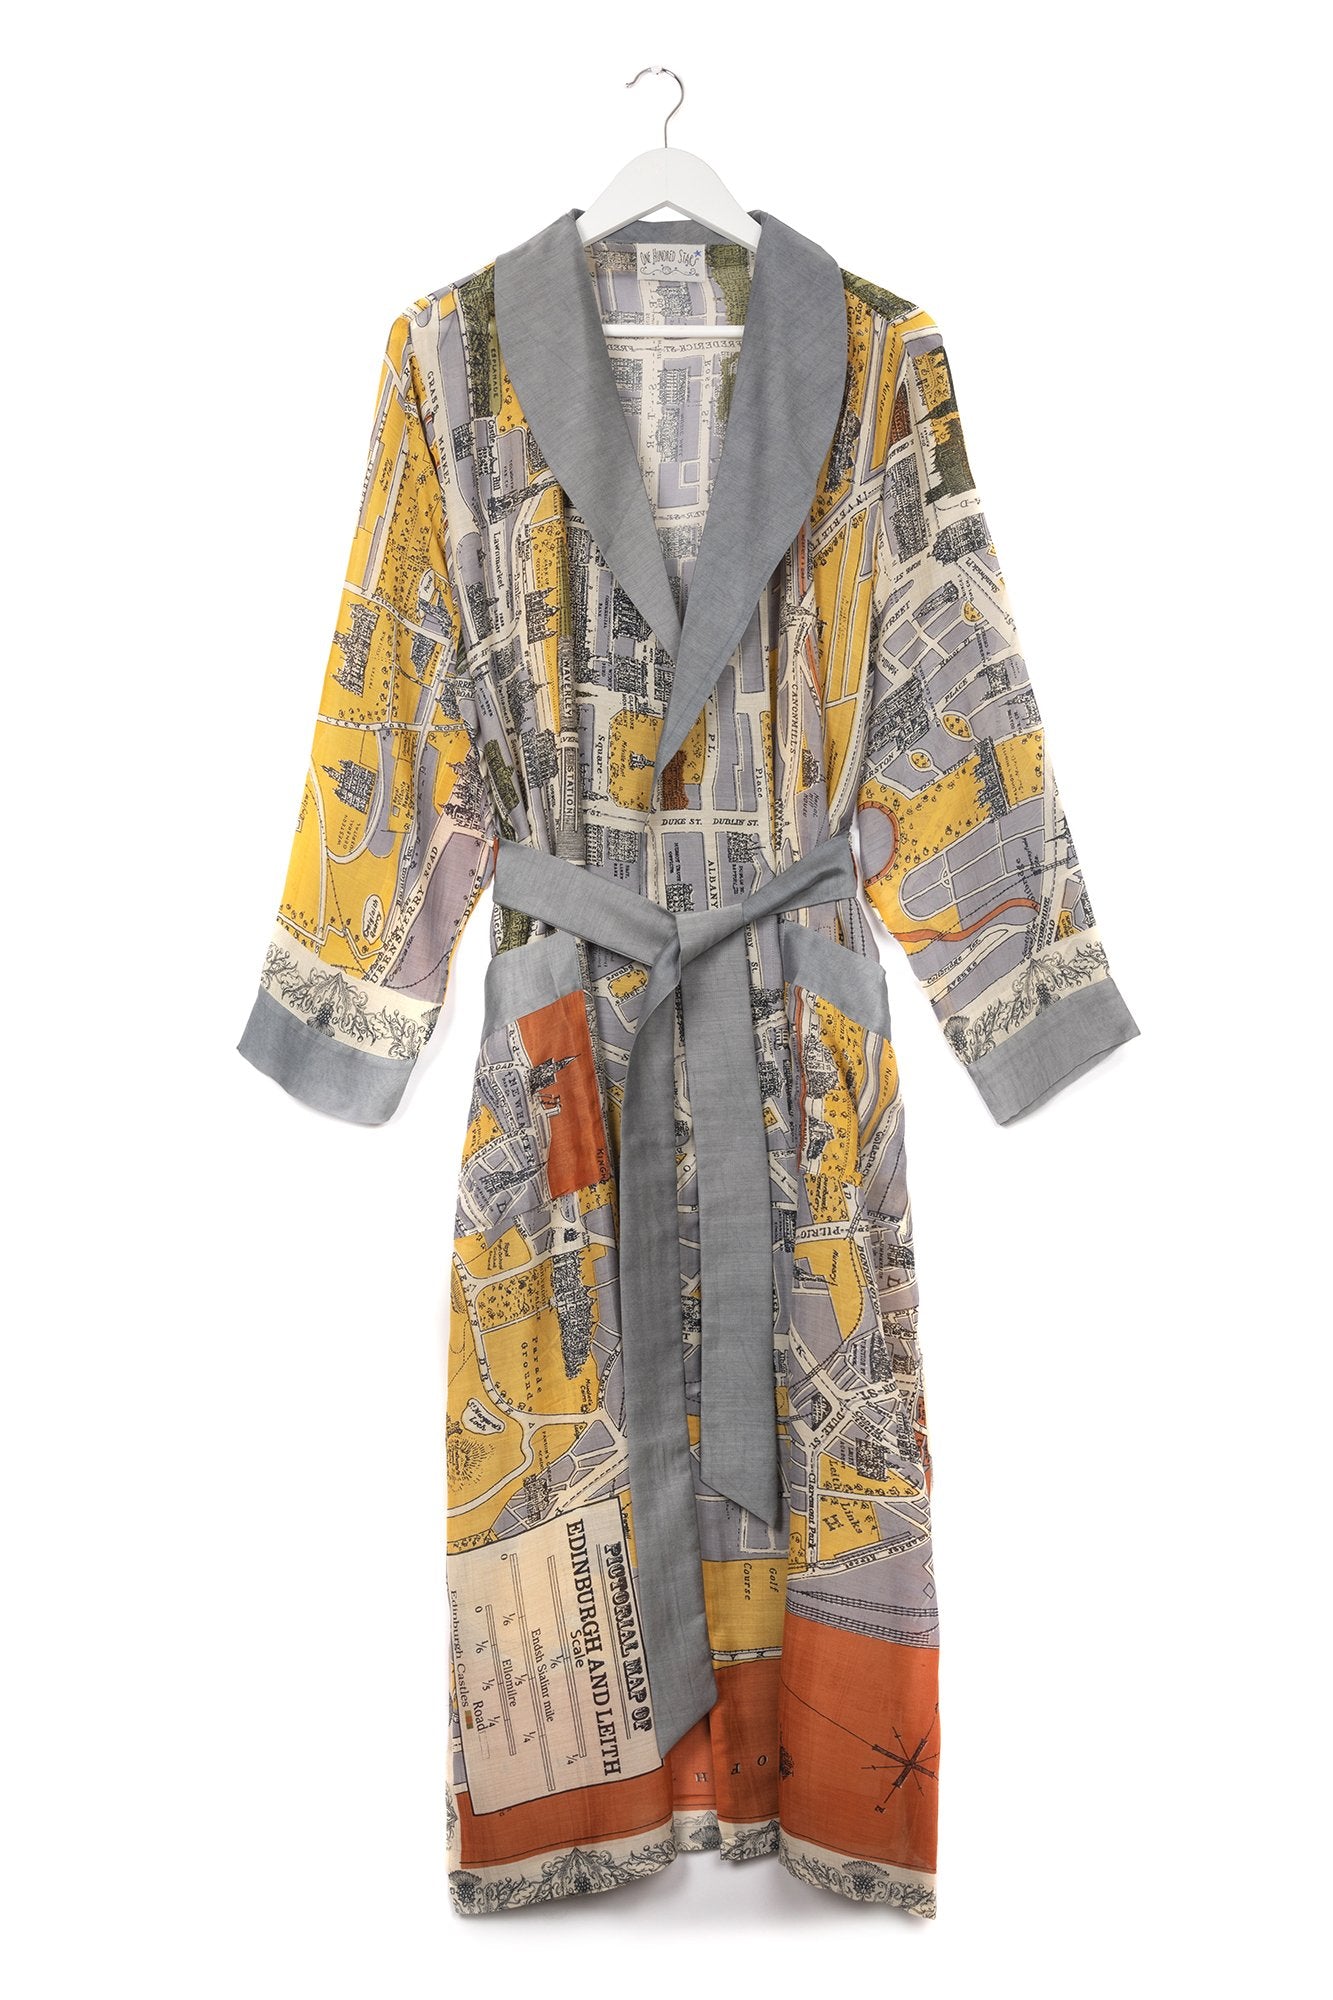 Fine dressing gown with map print of Edinburgh.